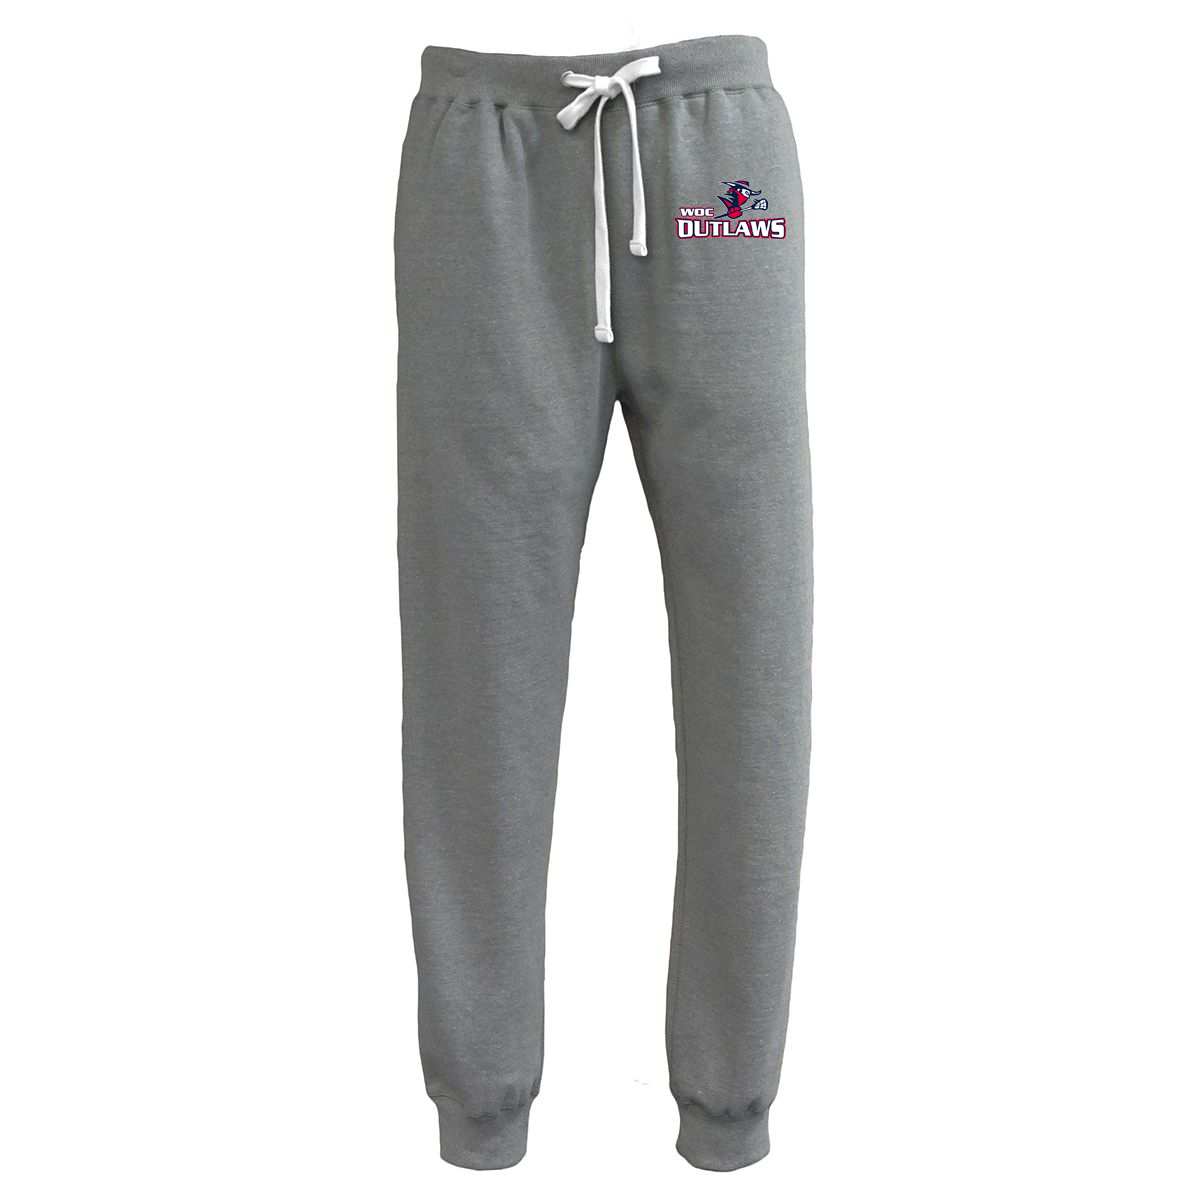 WOC Outlaws Lacrosse Club Joggers